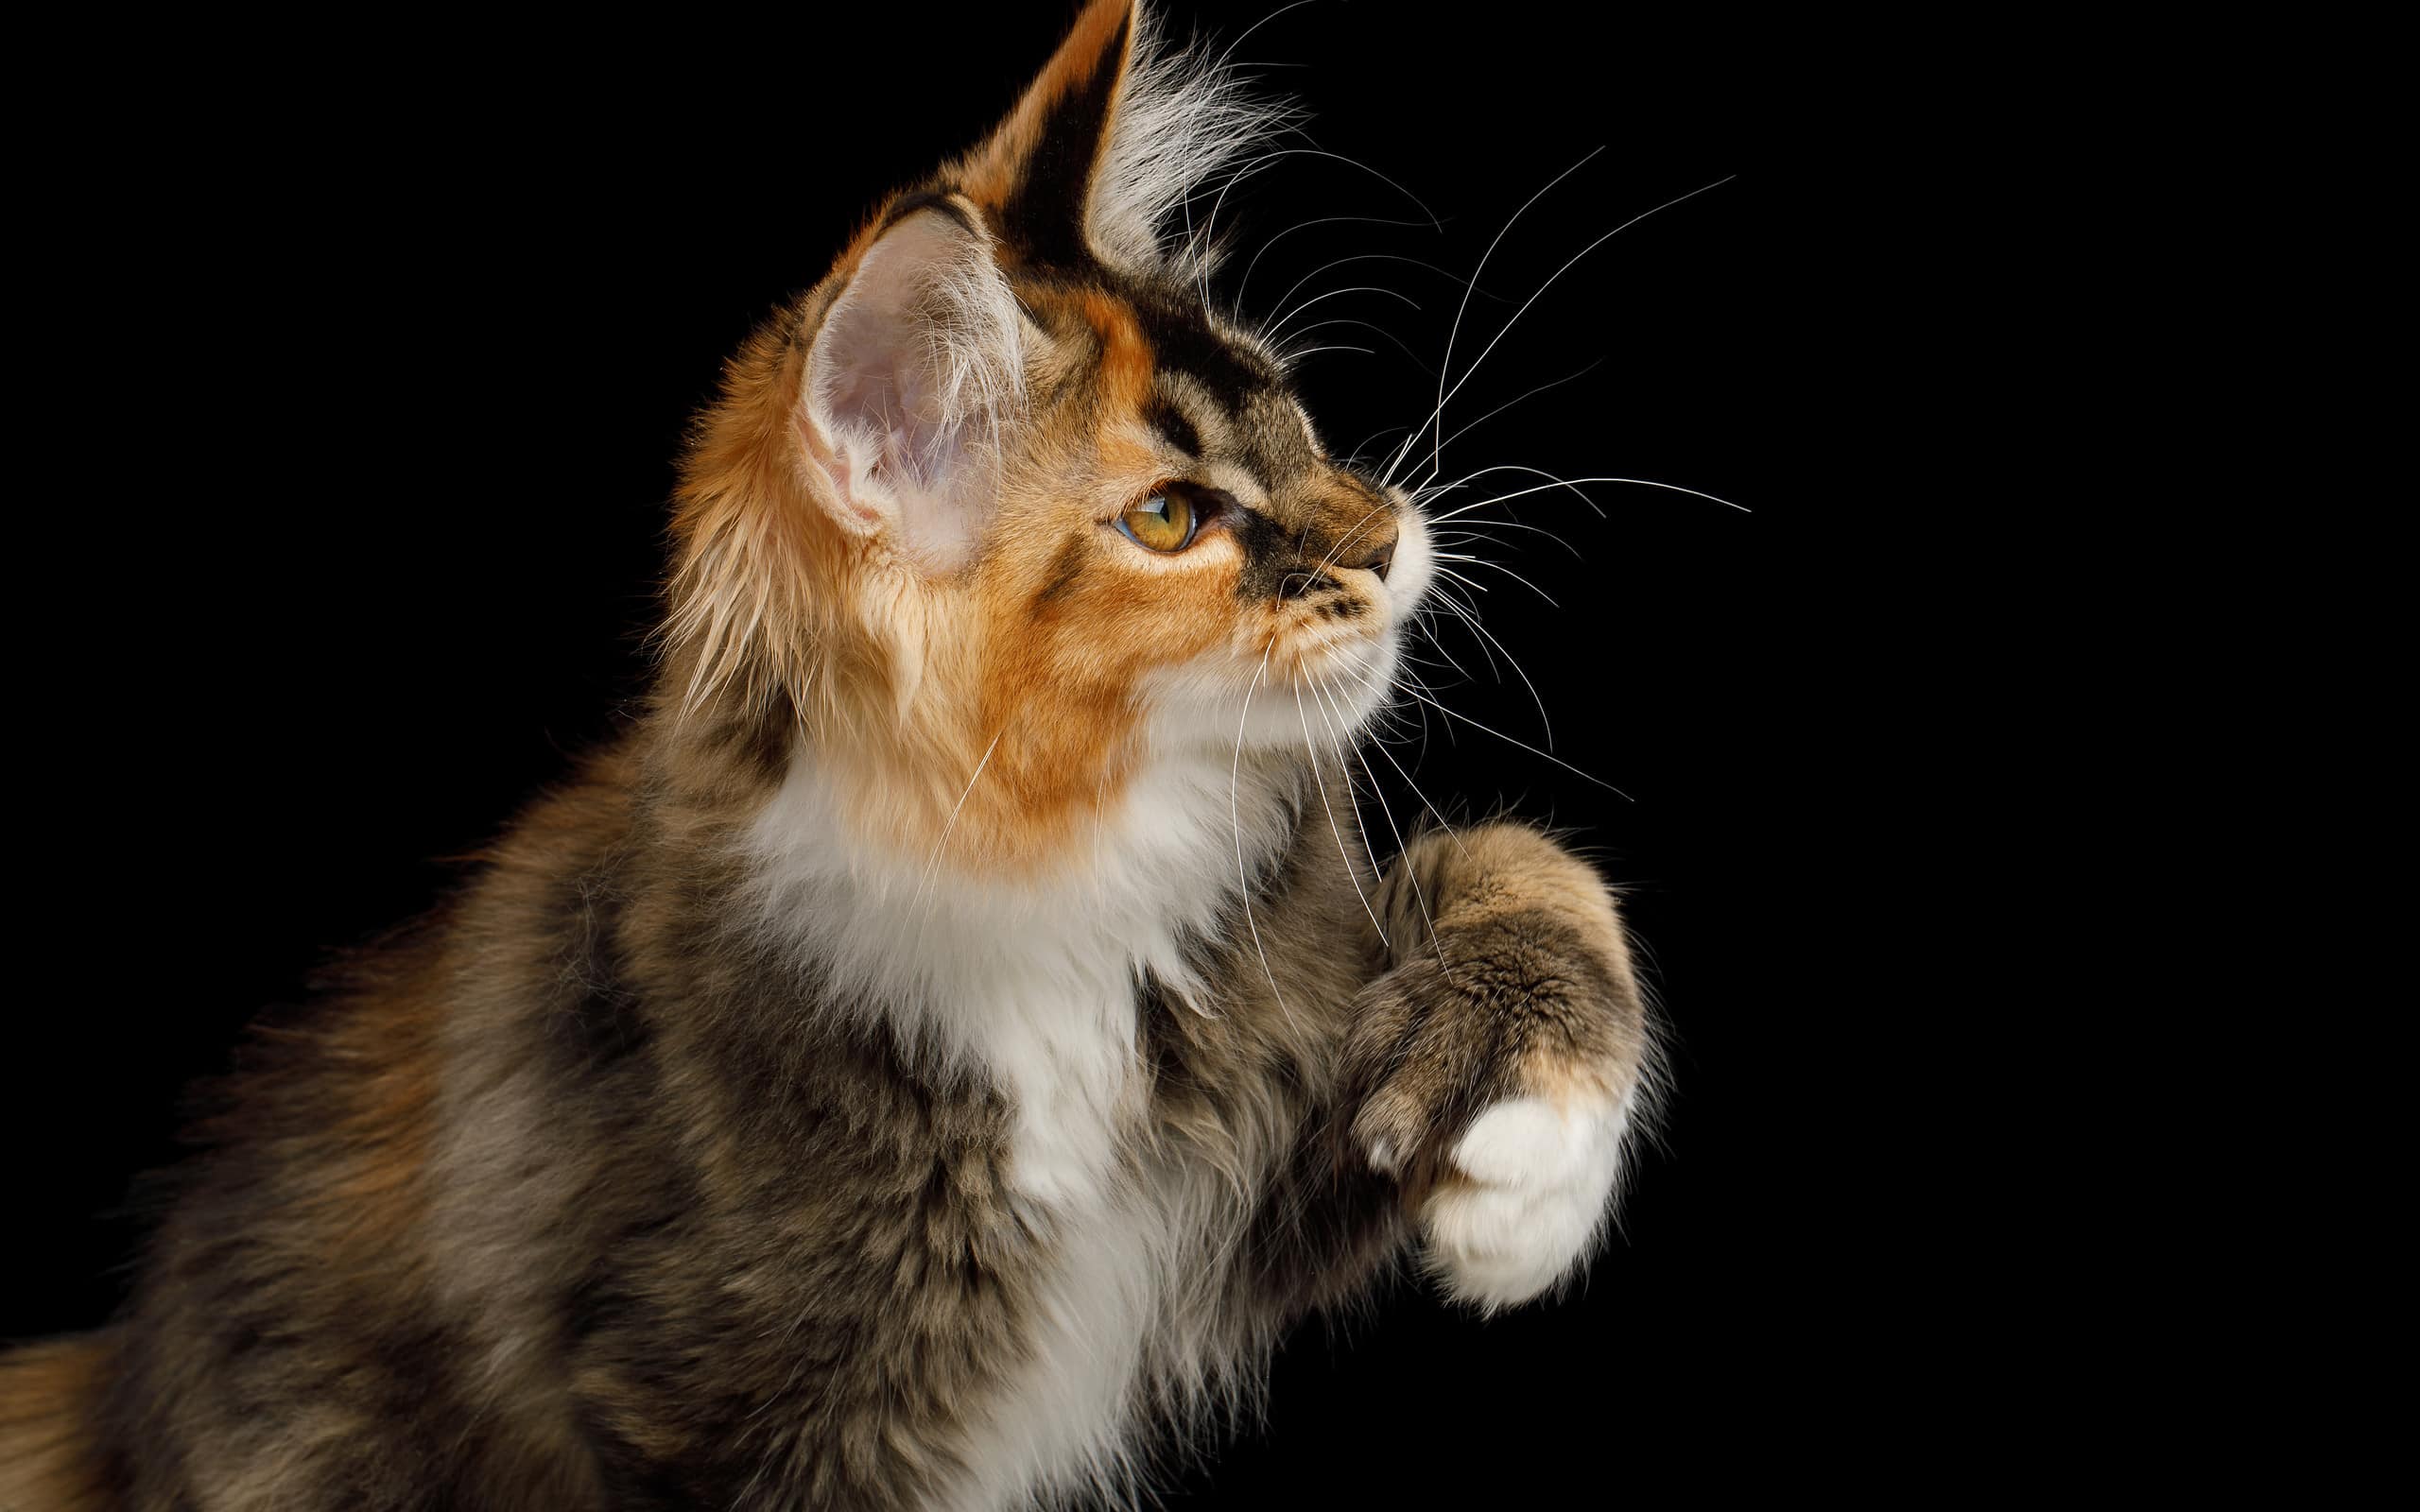 Maine Coon cats may have an advantage with their polydactylism